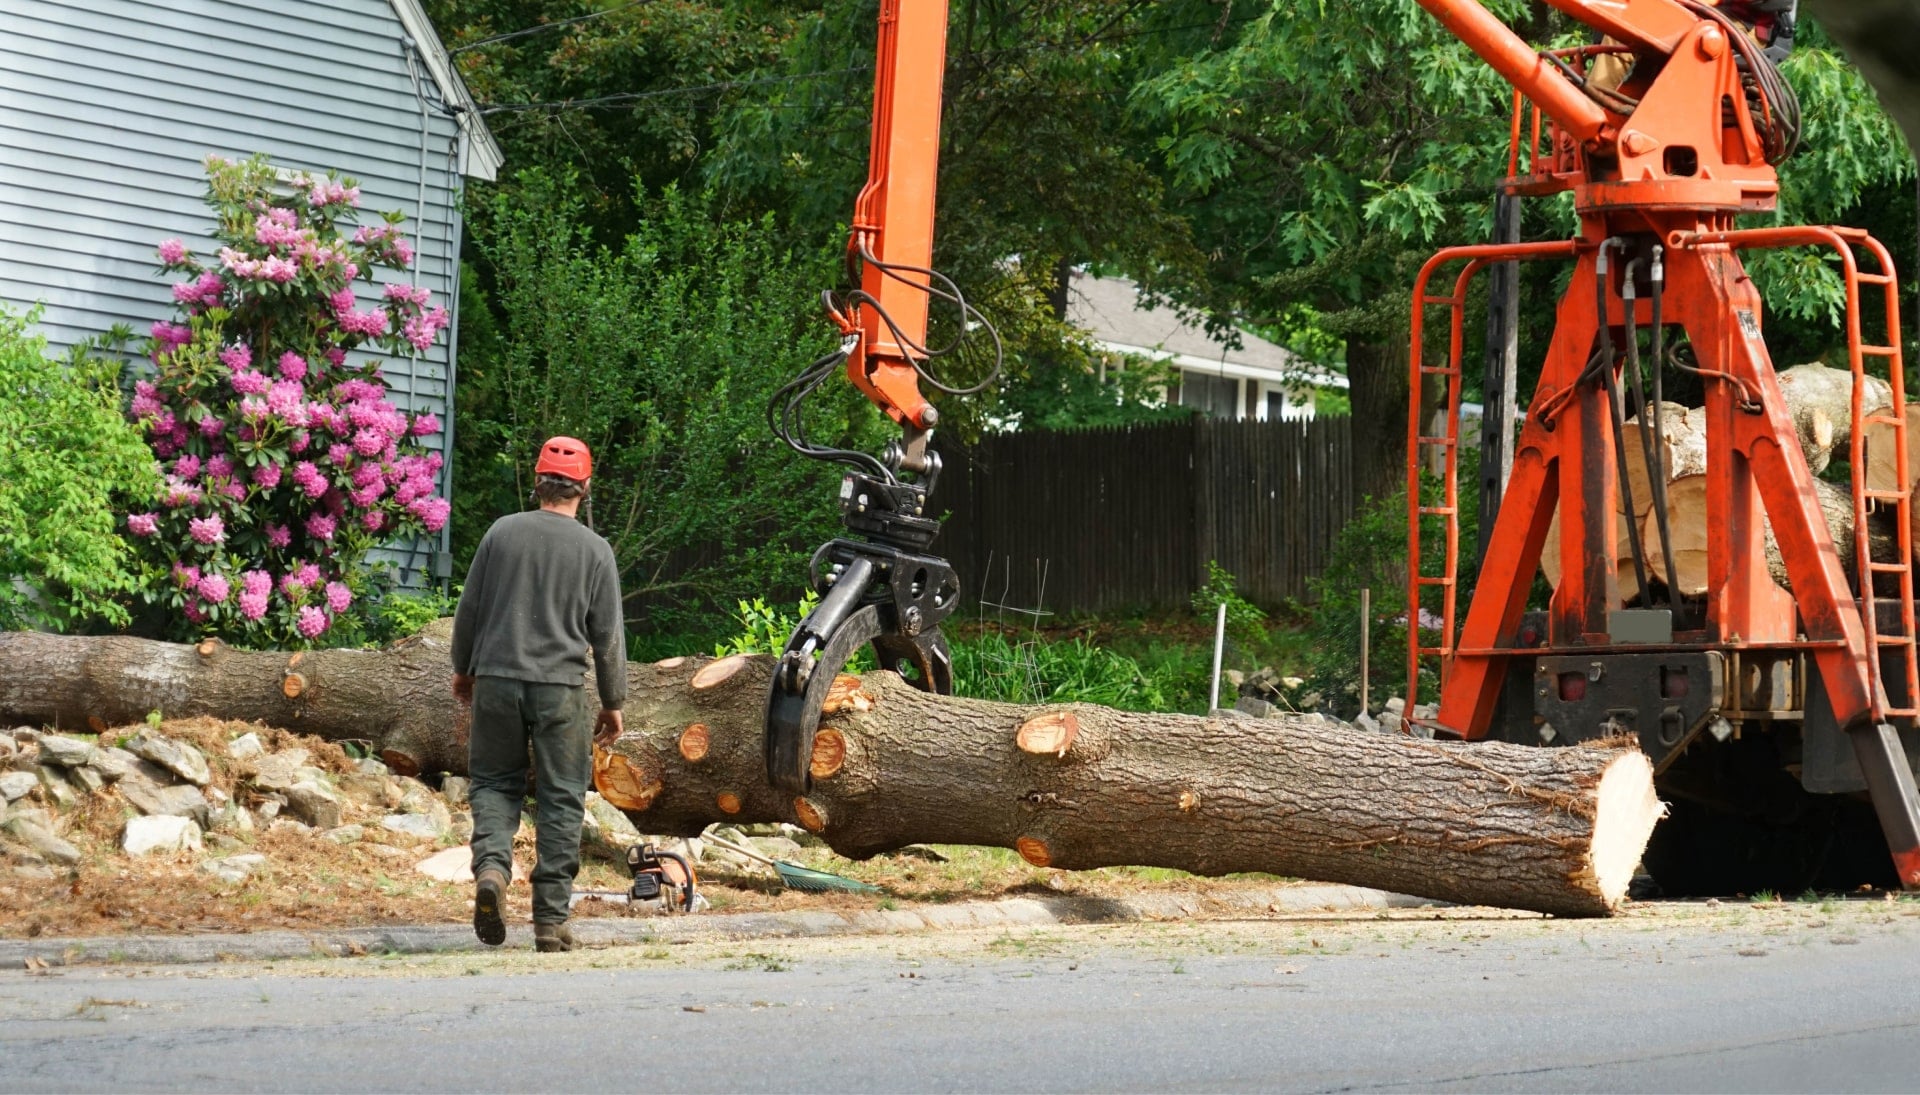 Local partner for Tree removal services in Orange County